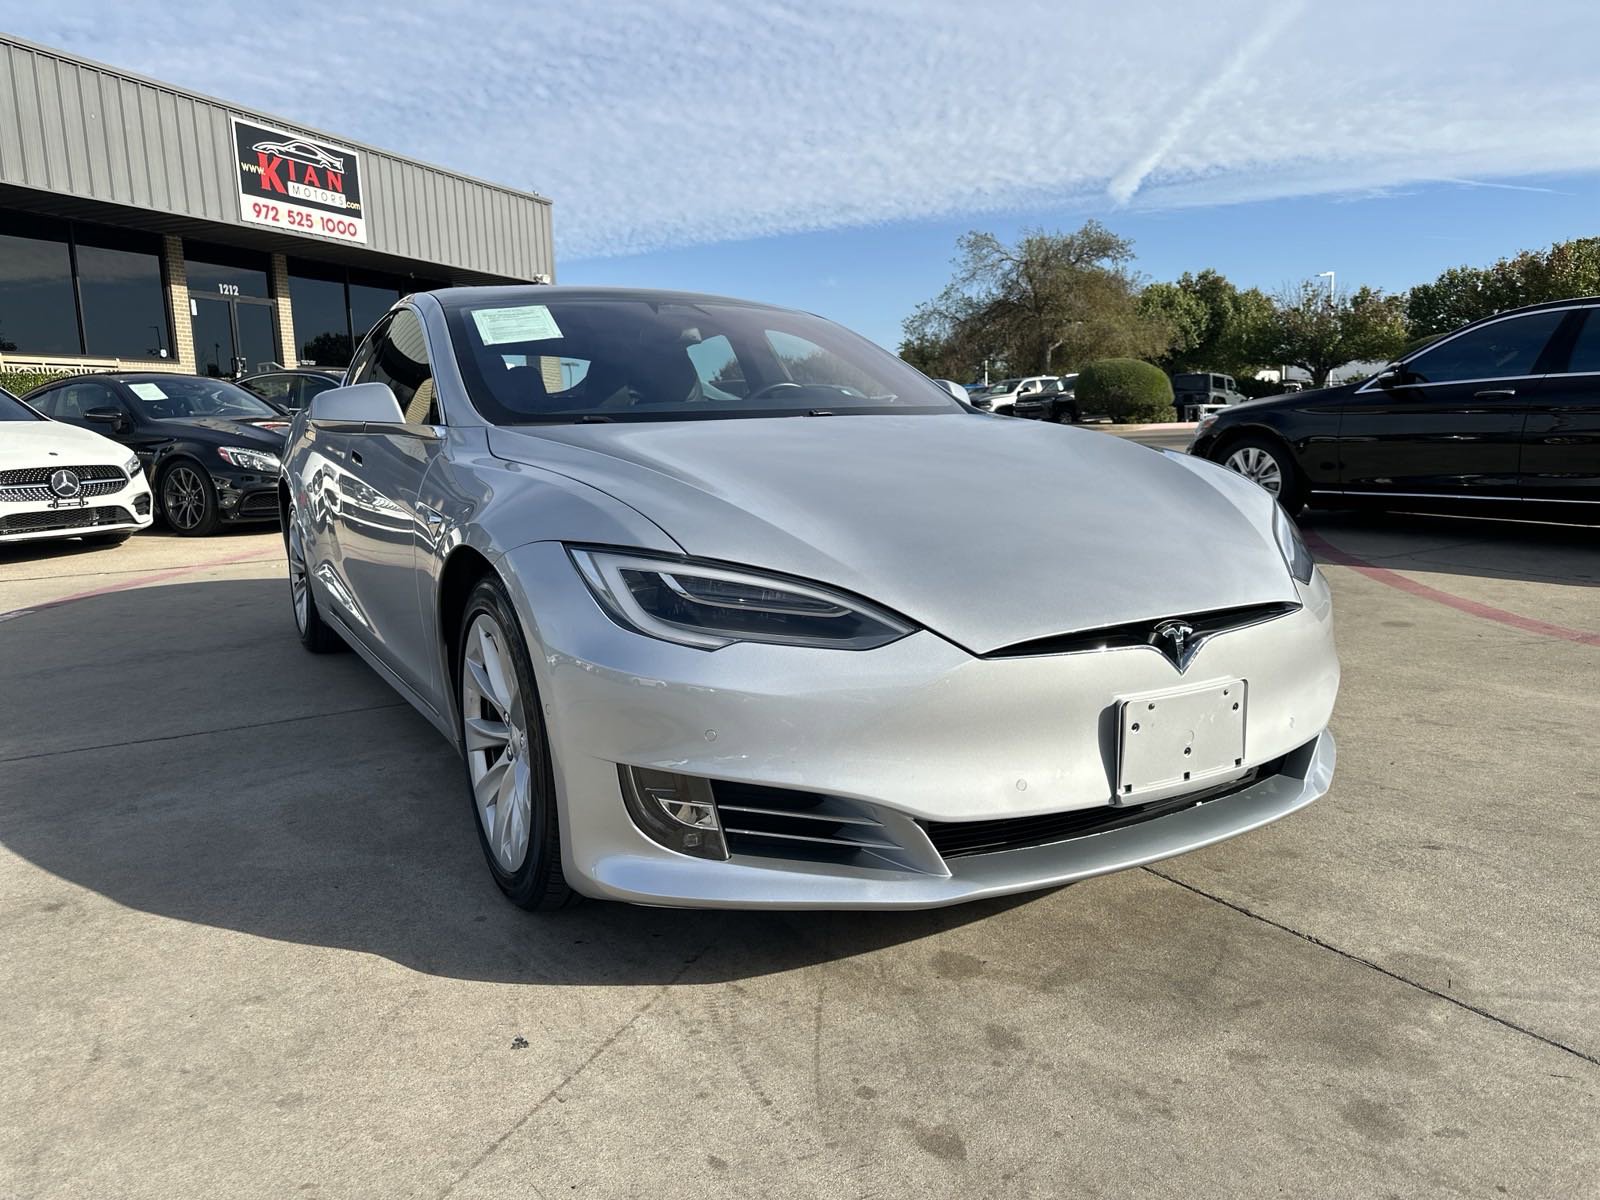 Used 2018 Tesla Model S for Sale Right Now - Autotrader